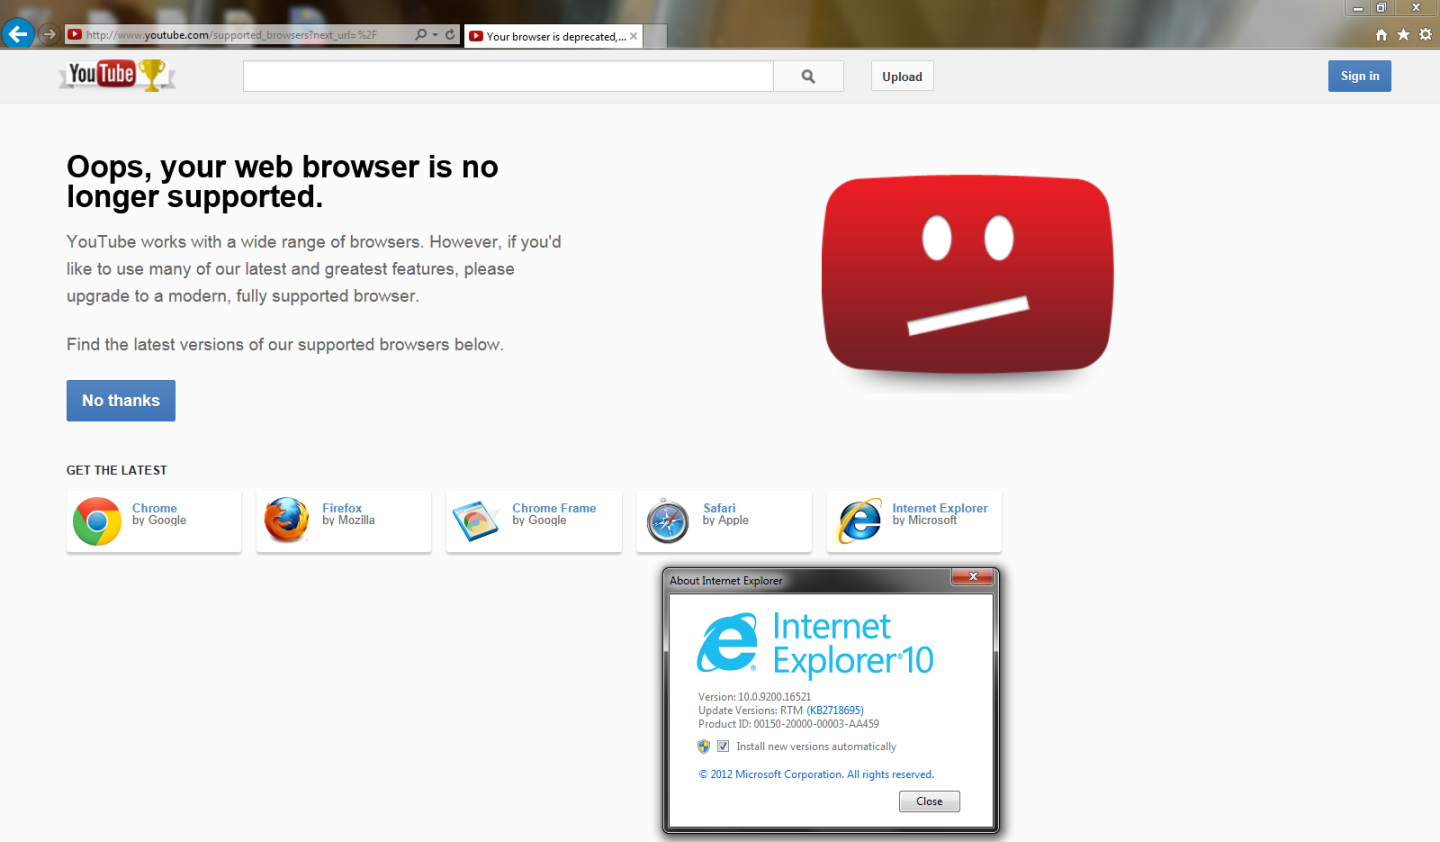 YouTube encourages users to update their browser